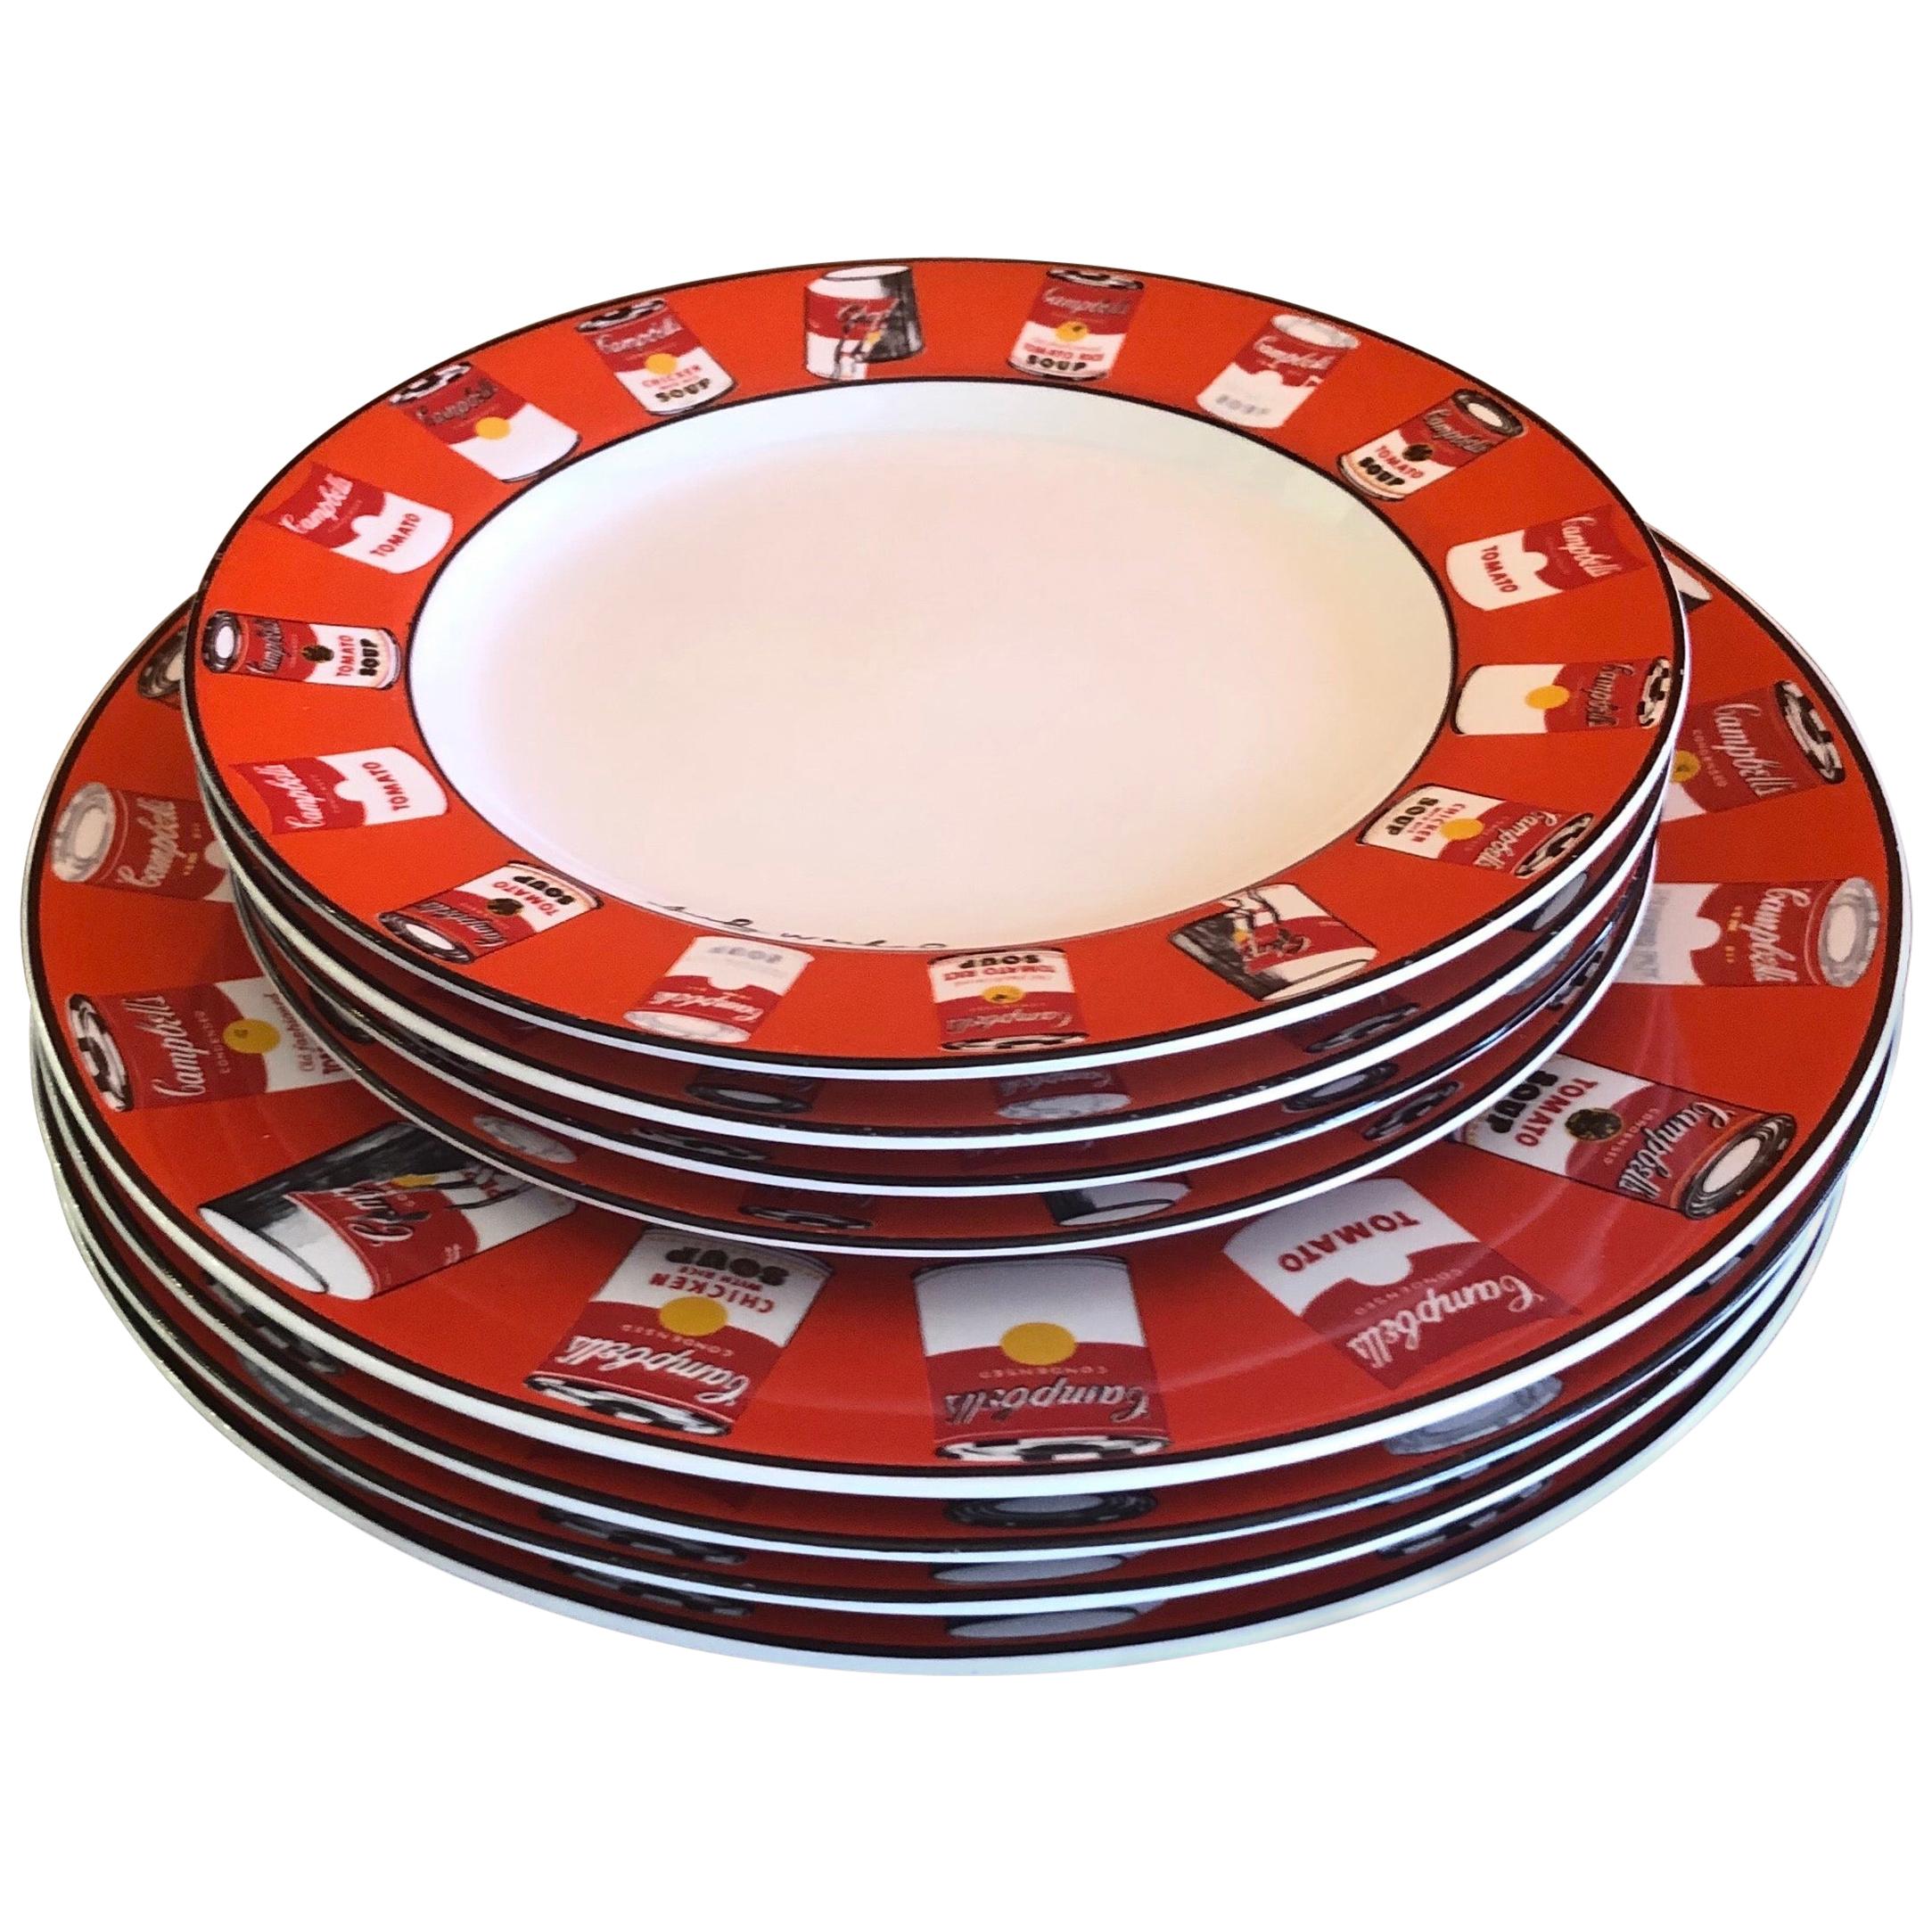 Set of Four Cambells Soup Salad and Dinner Plates by Andy Warhol for Block Art